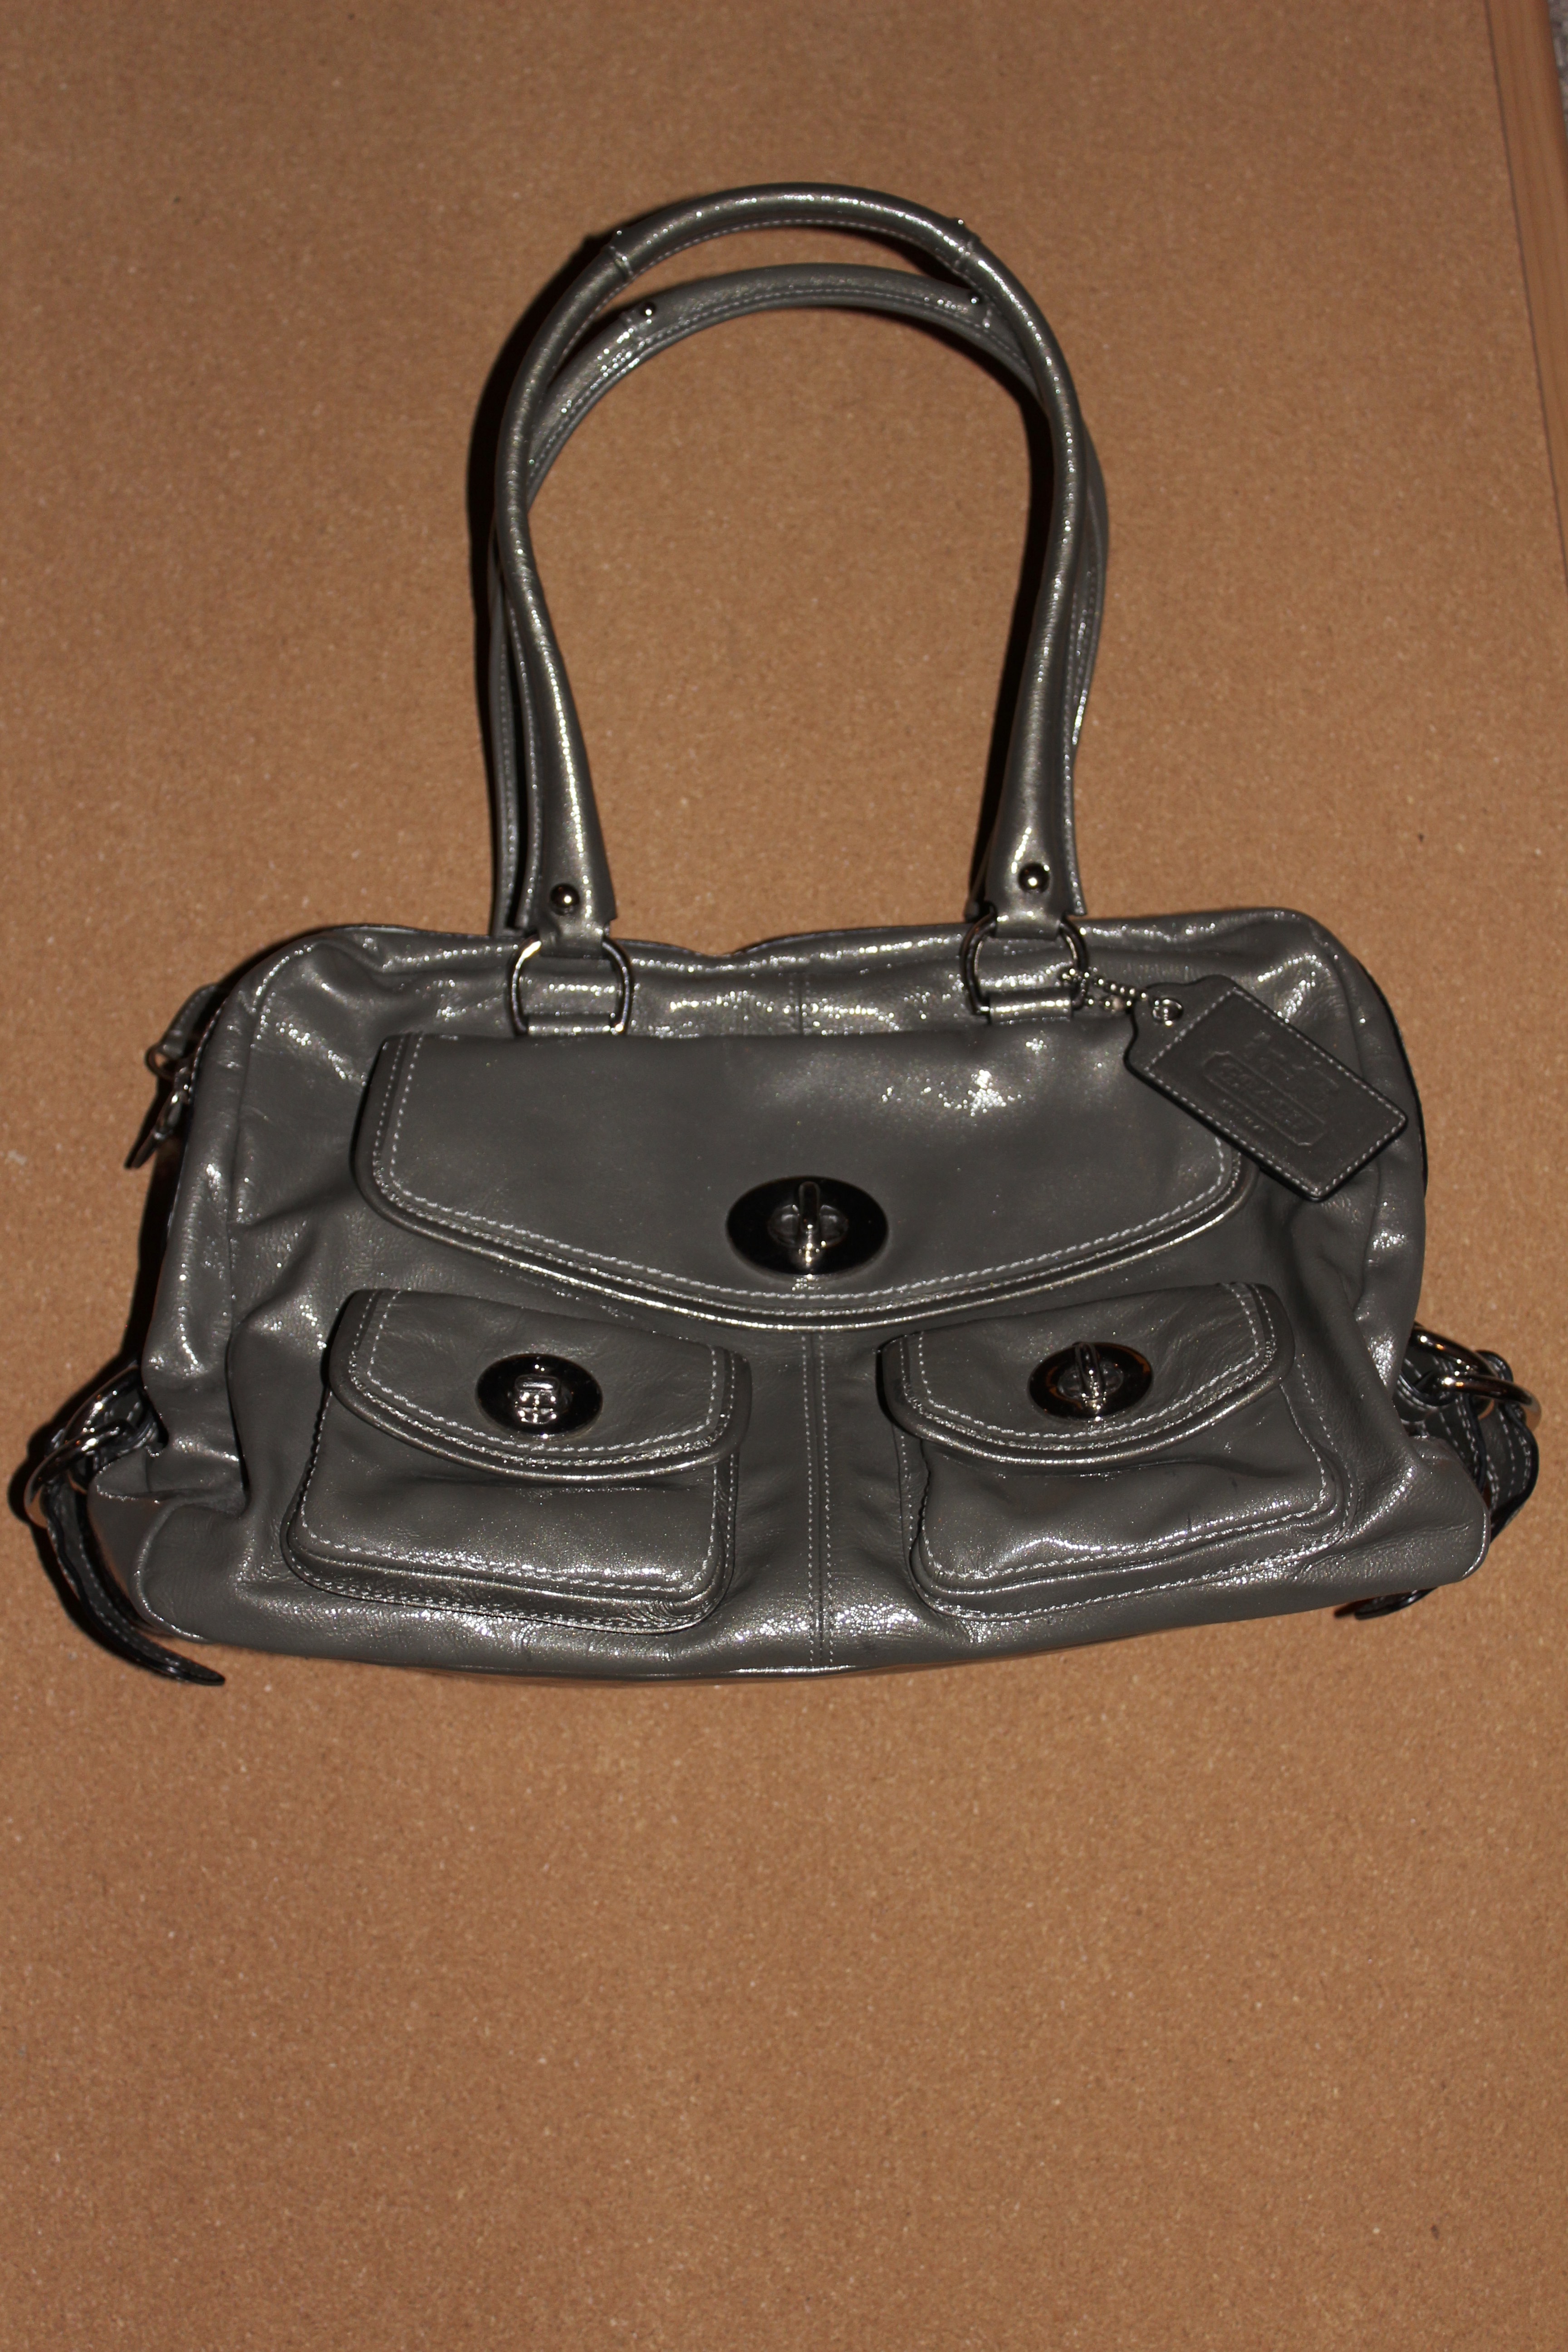 4 Gorgeous Coach Authentic Handbags - Never Used! For Sale | nrd.kbic-nsn.gov | Classifieds